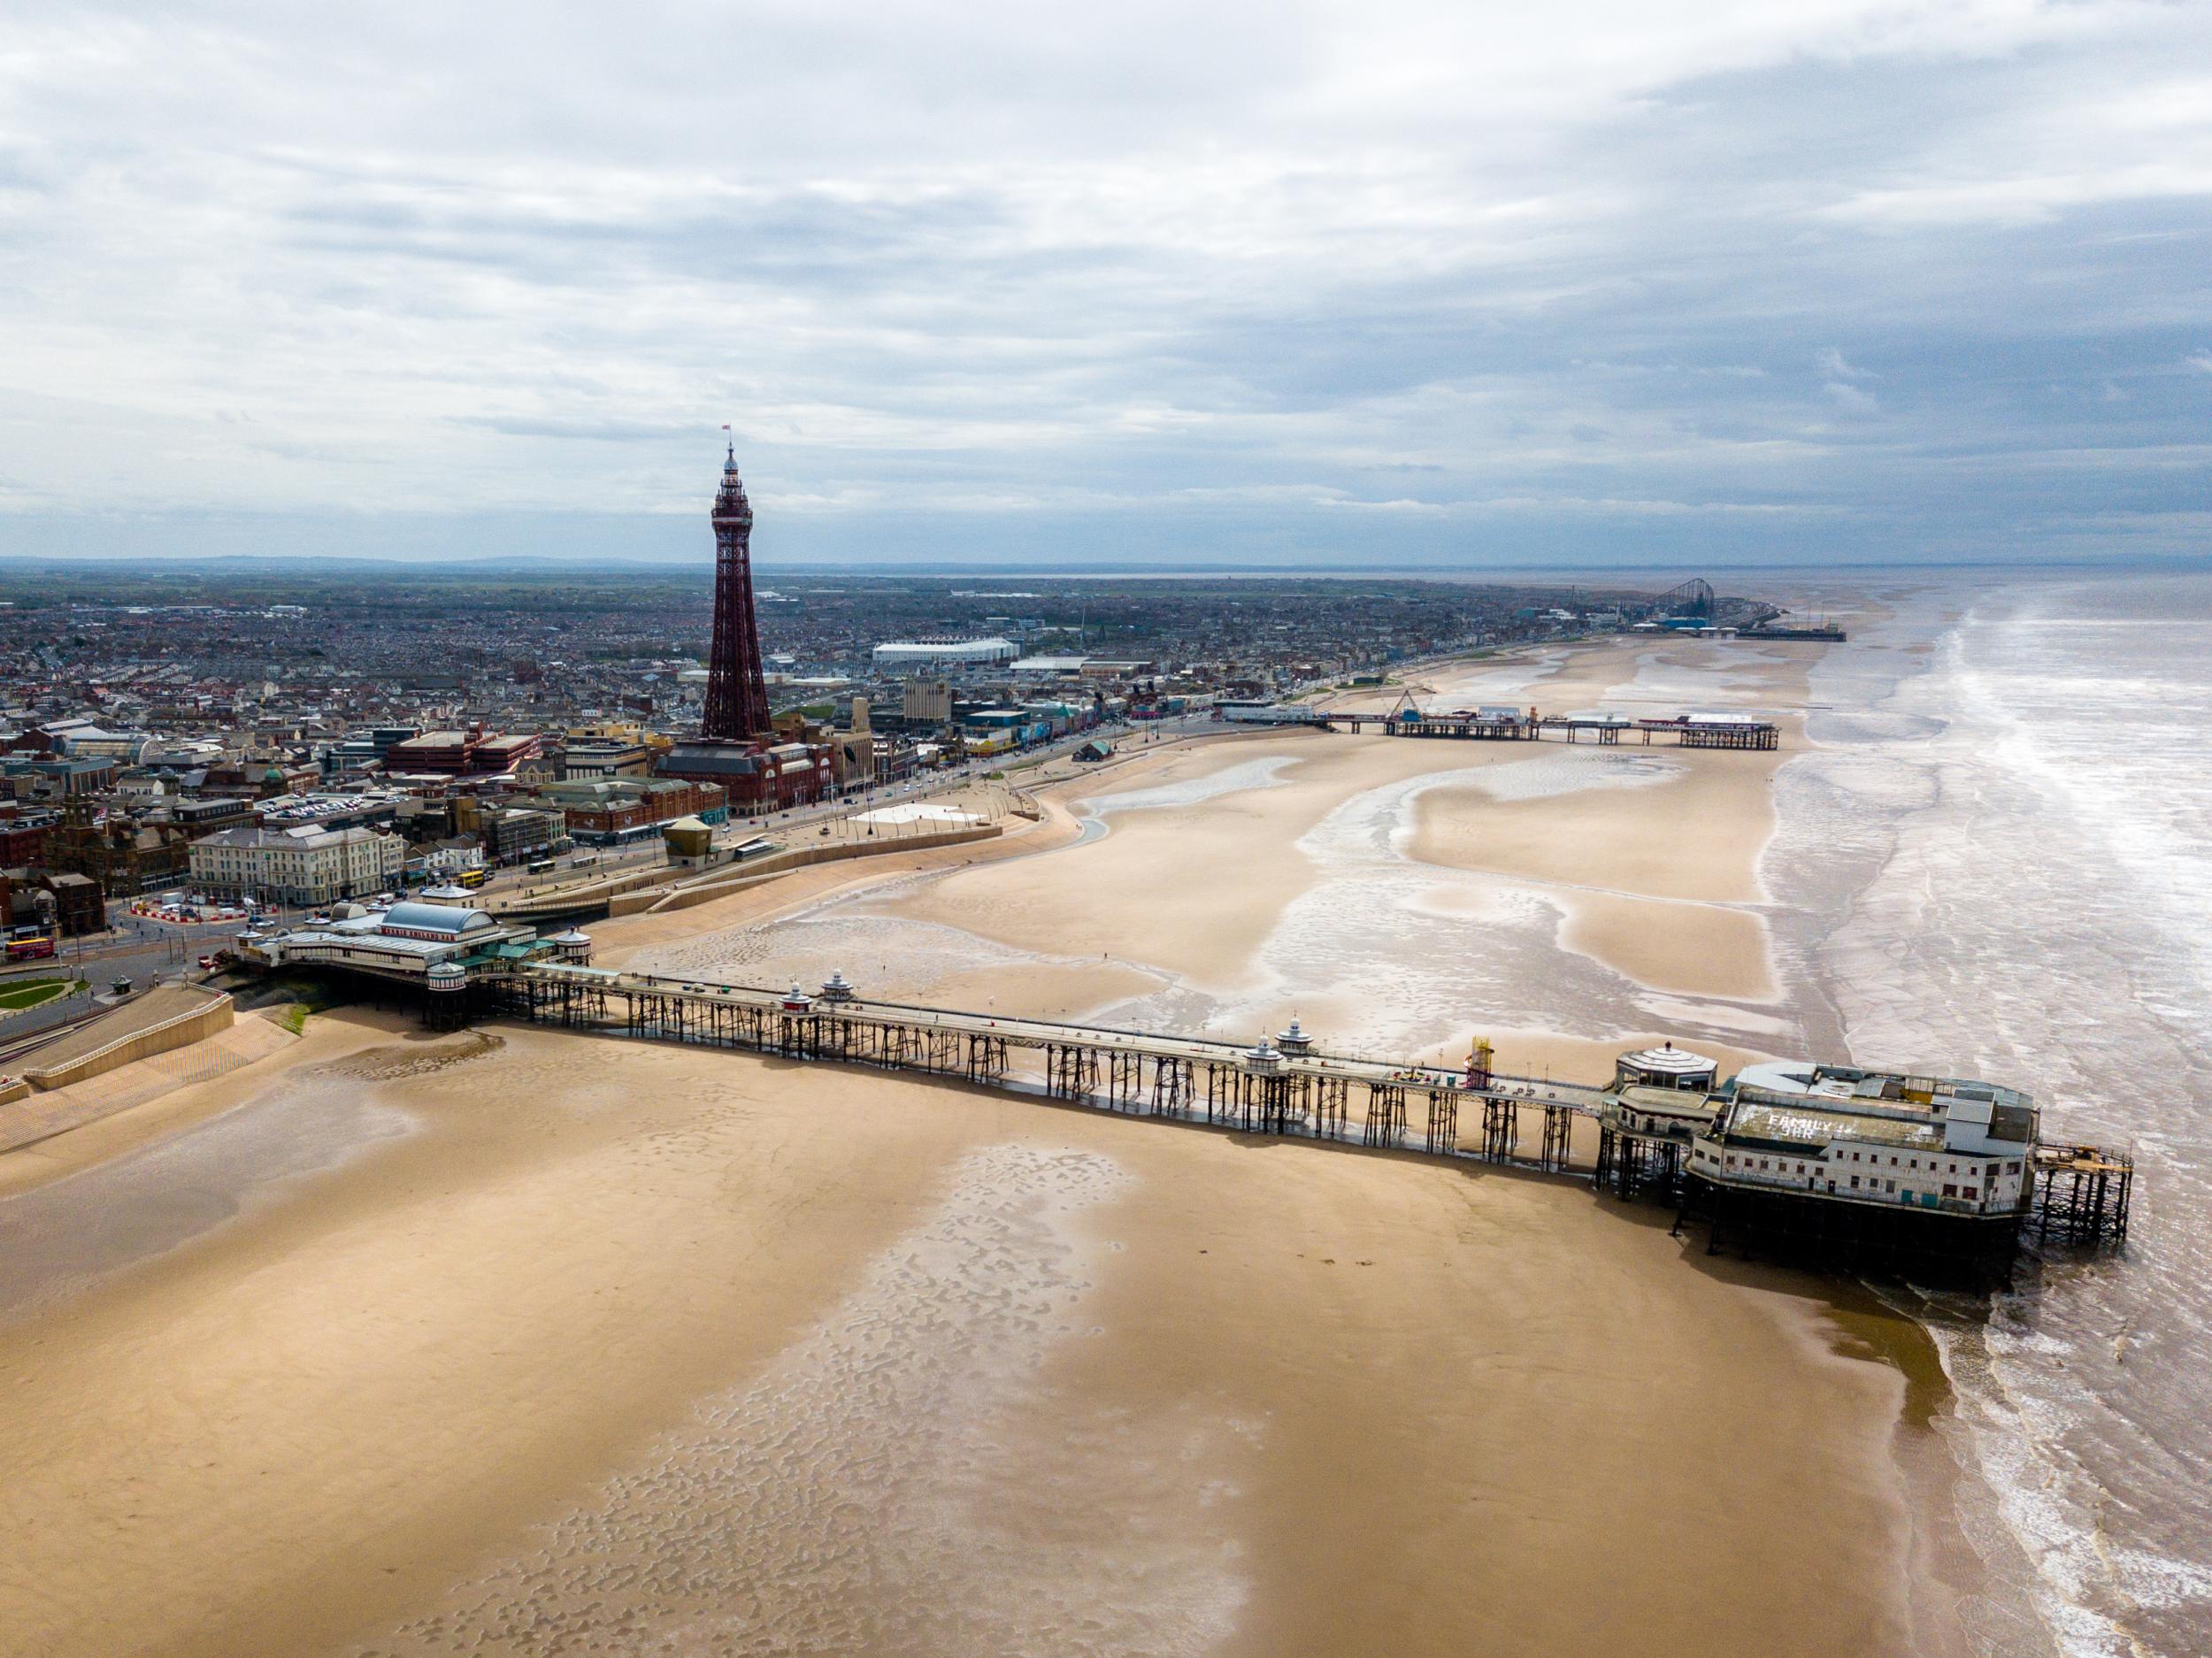 Blackpool's beach will be more easily accessible from 2020